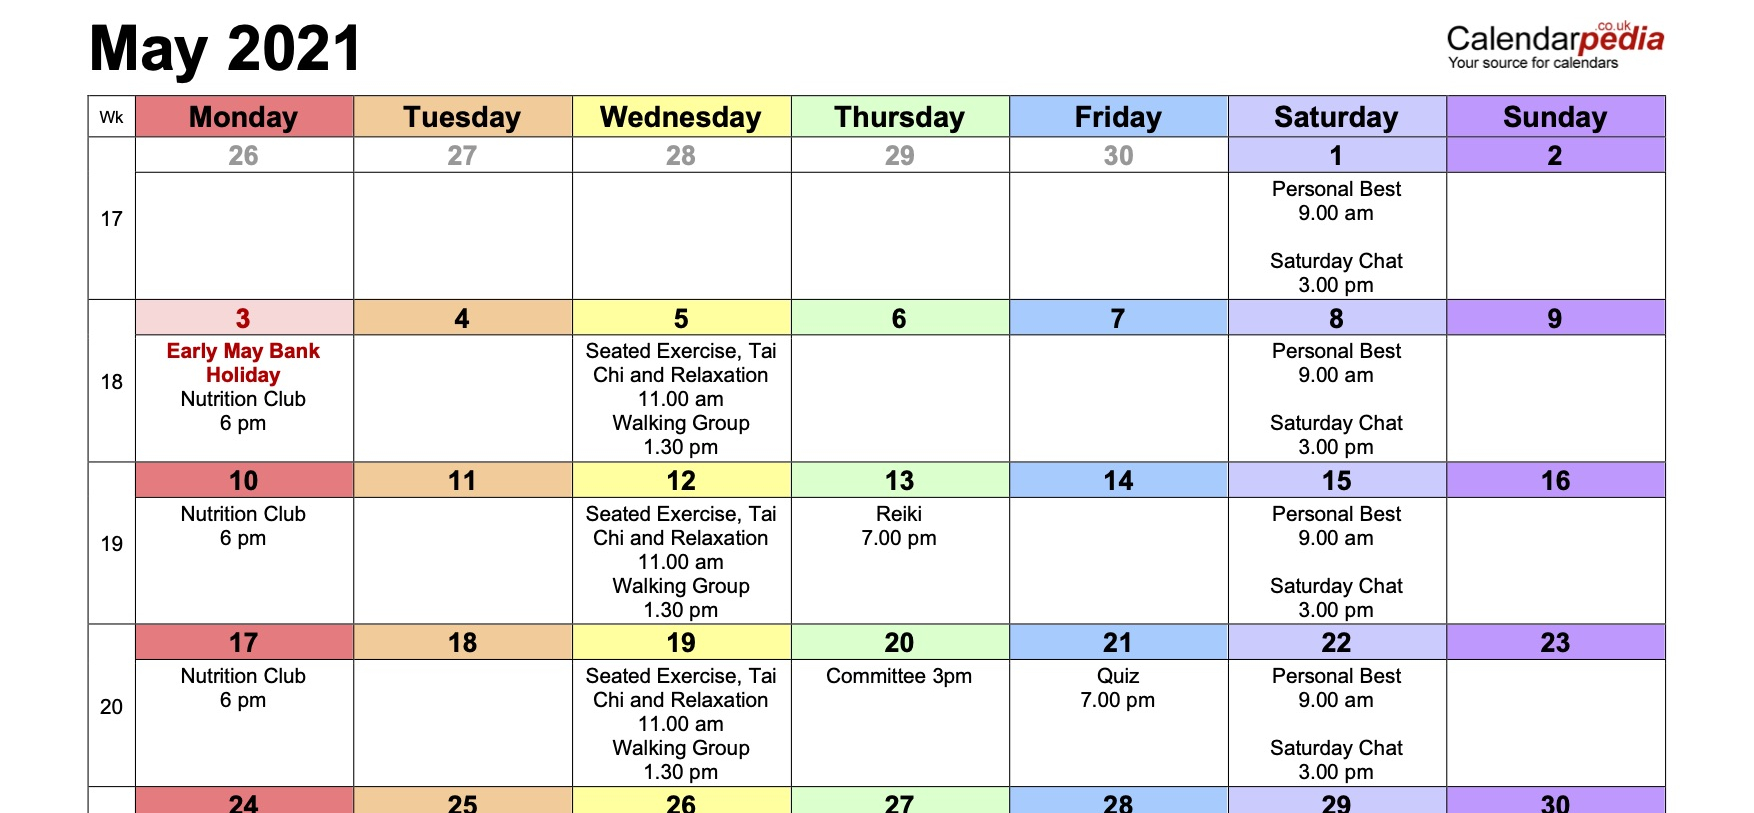 Group Calendar for May 2021